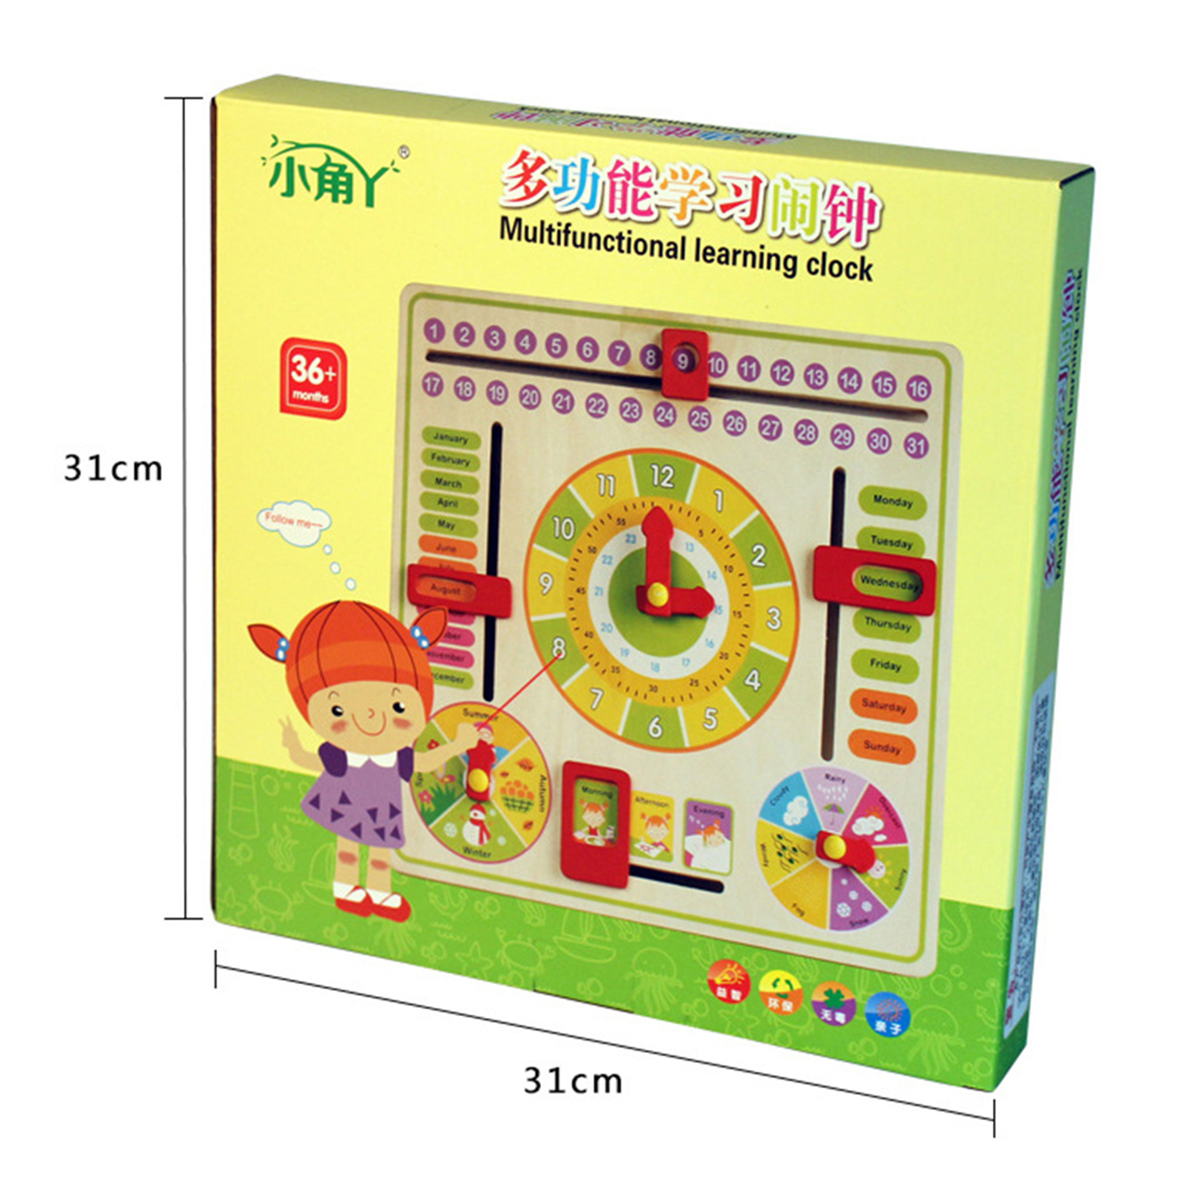 Wooden-Multifunction-Learning-Clock-Toy-Alarm-Calendar-Cognition-Educational-Toys-1550385-10